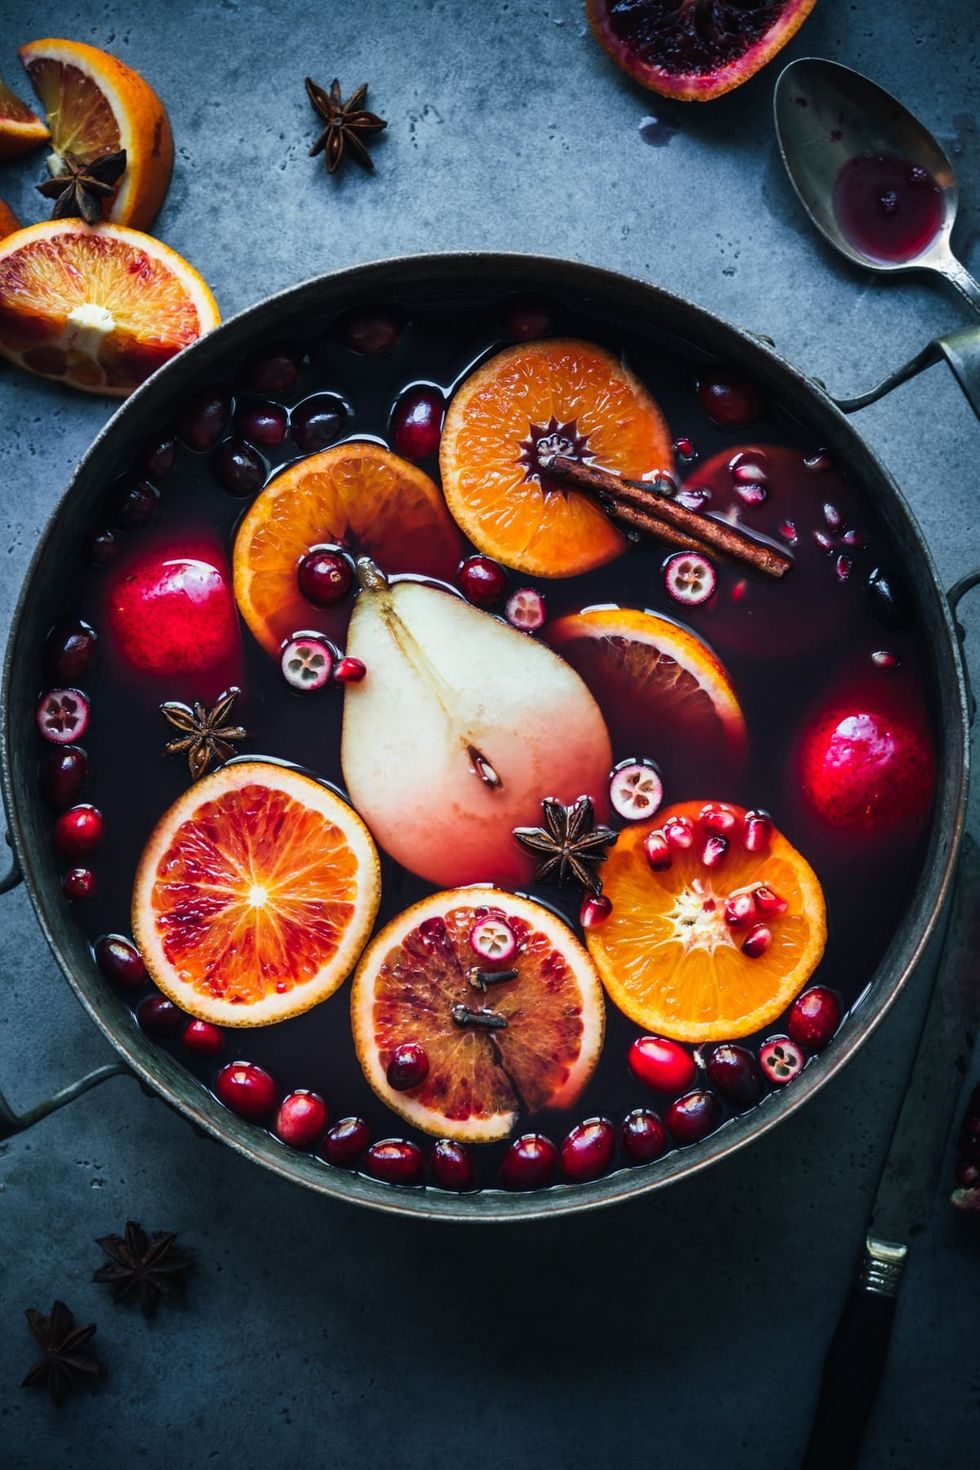 Spiced Citrus Mulled Wine